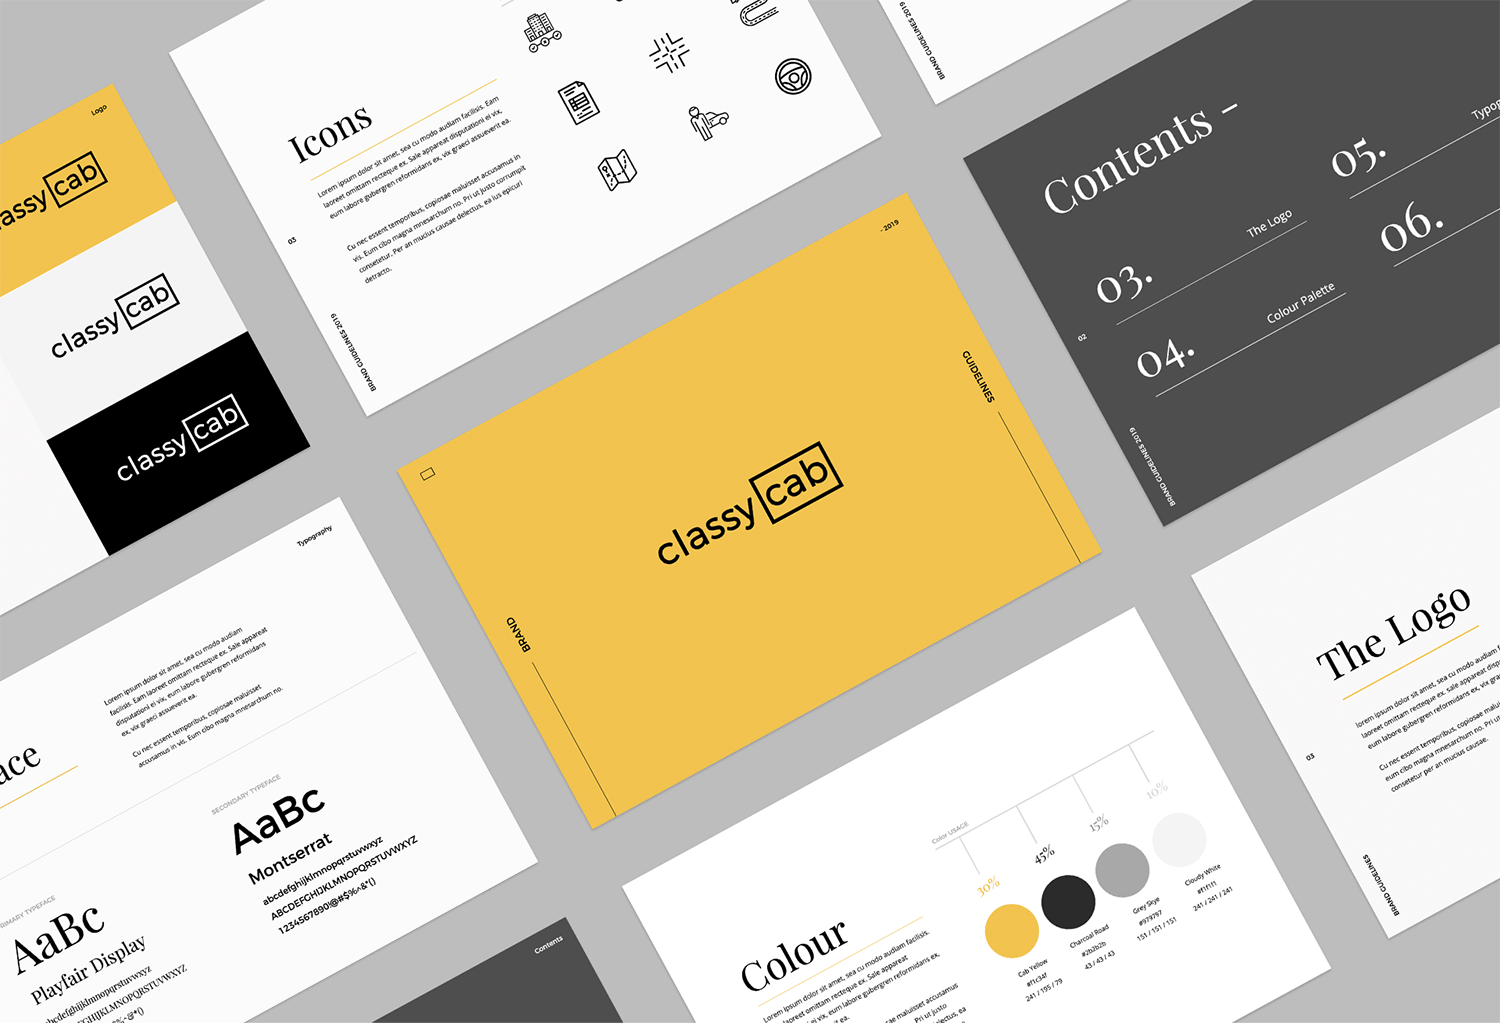 Free Brand Style Guides Templates Design Resources Graphic Design Forum